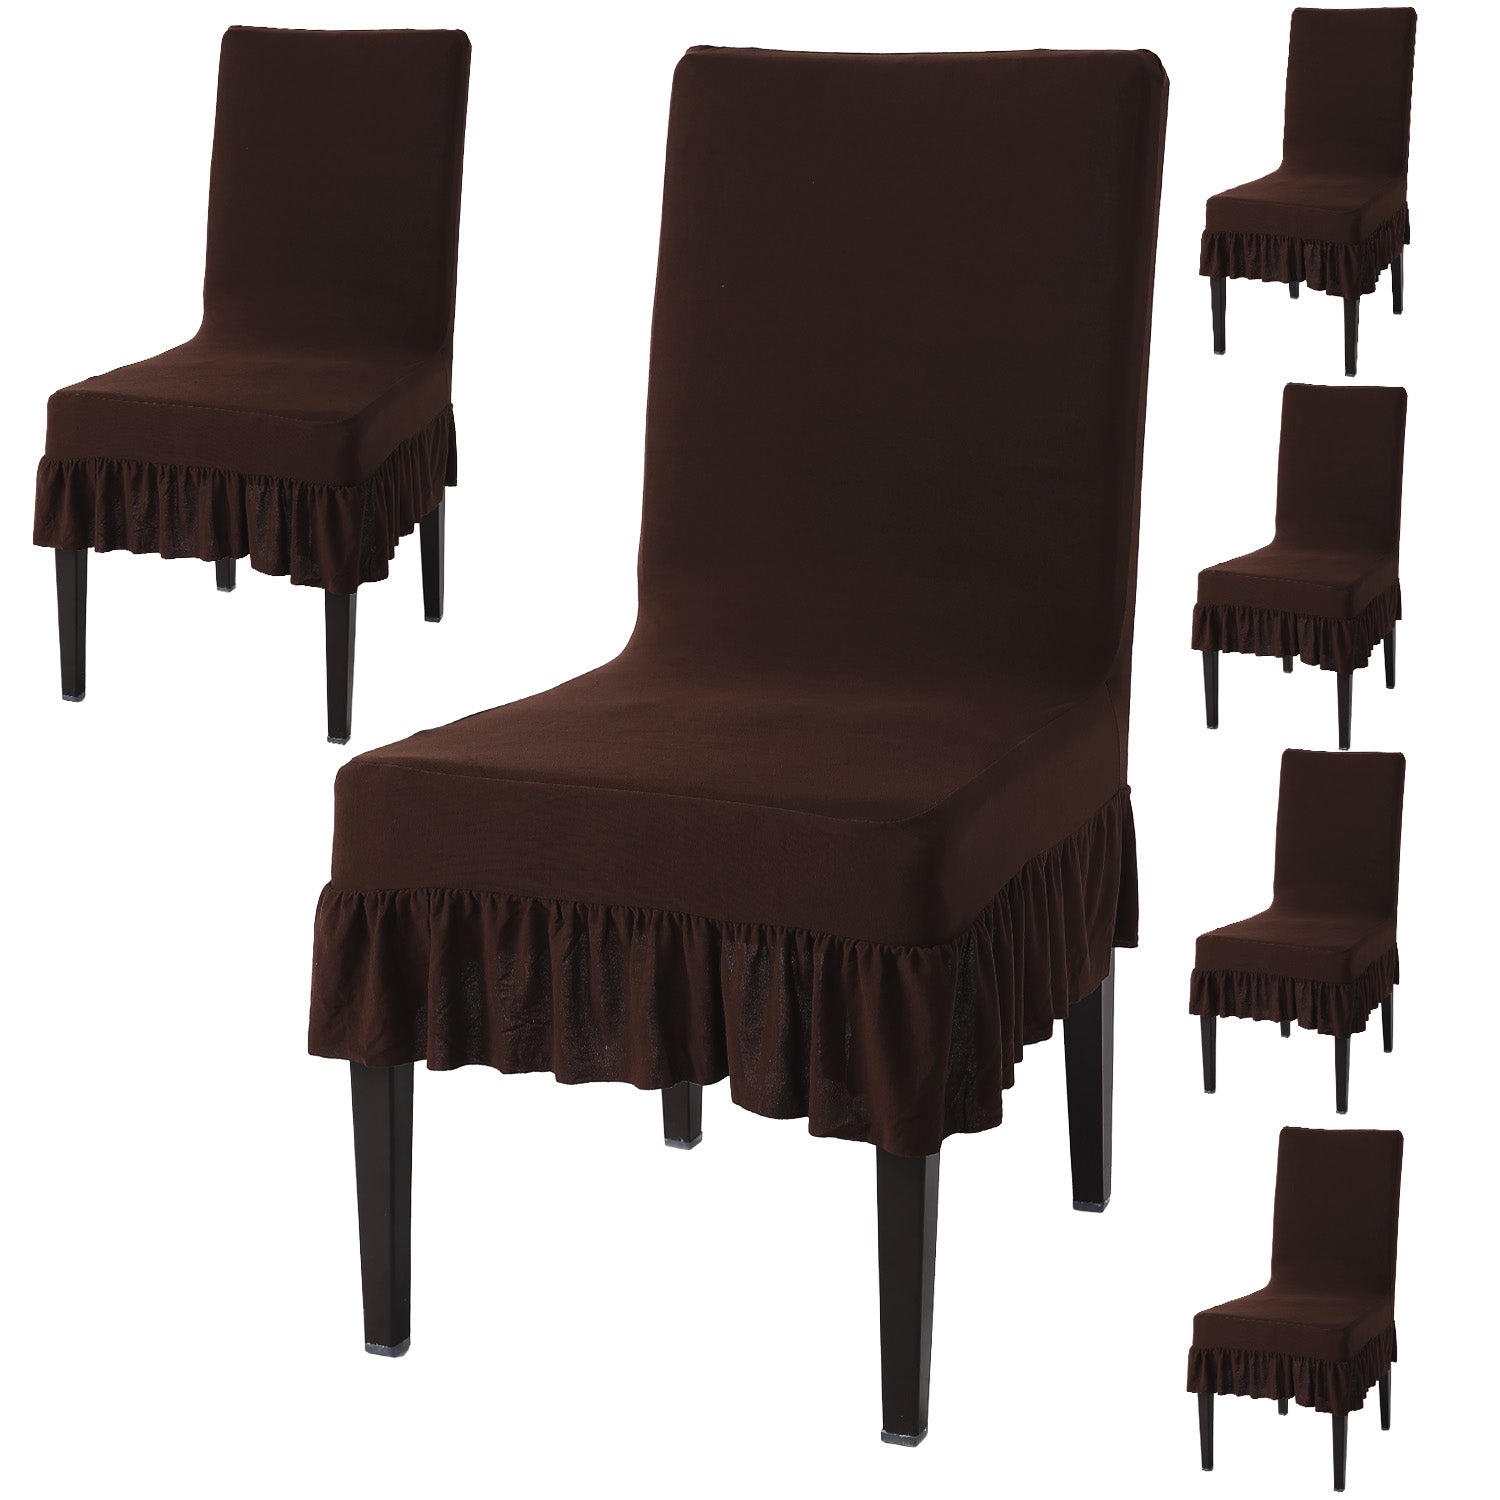 Elastic Stretchable Dining Chair Cover with Frill, Chocolate Brown